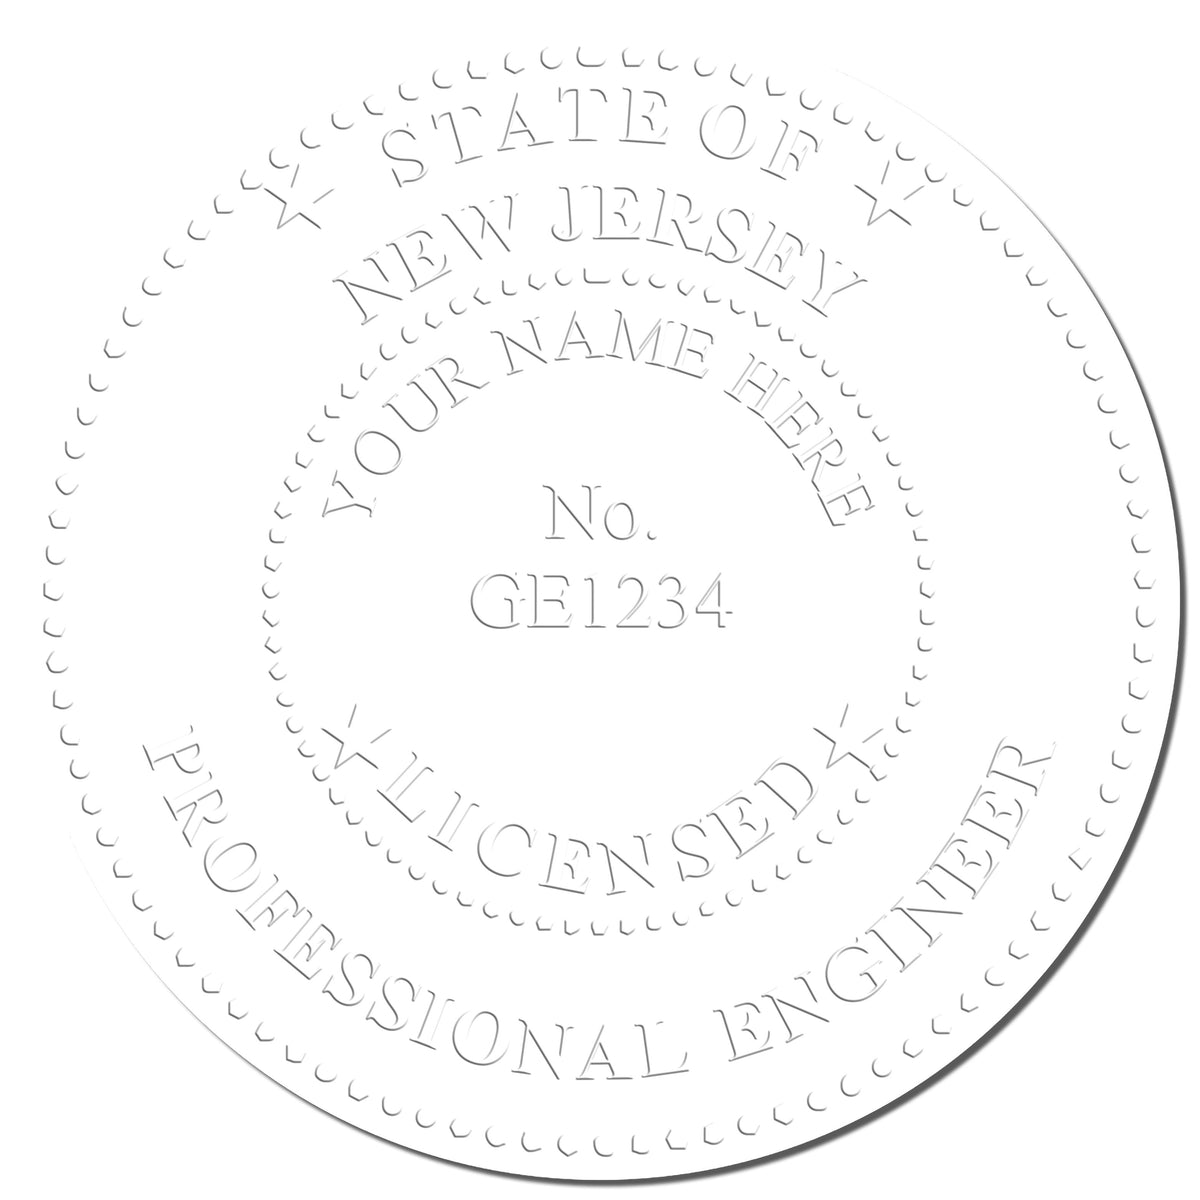 A photograph of the Handheld New Jersey Professional Engineer Embosser stamp impression reveals a vivid, professional image of the on paper.